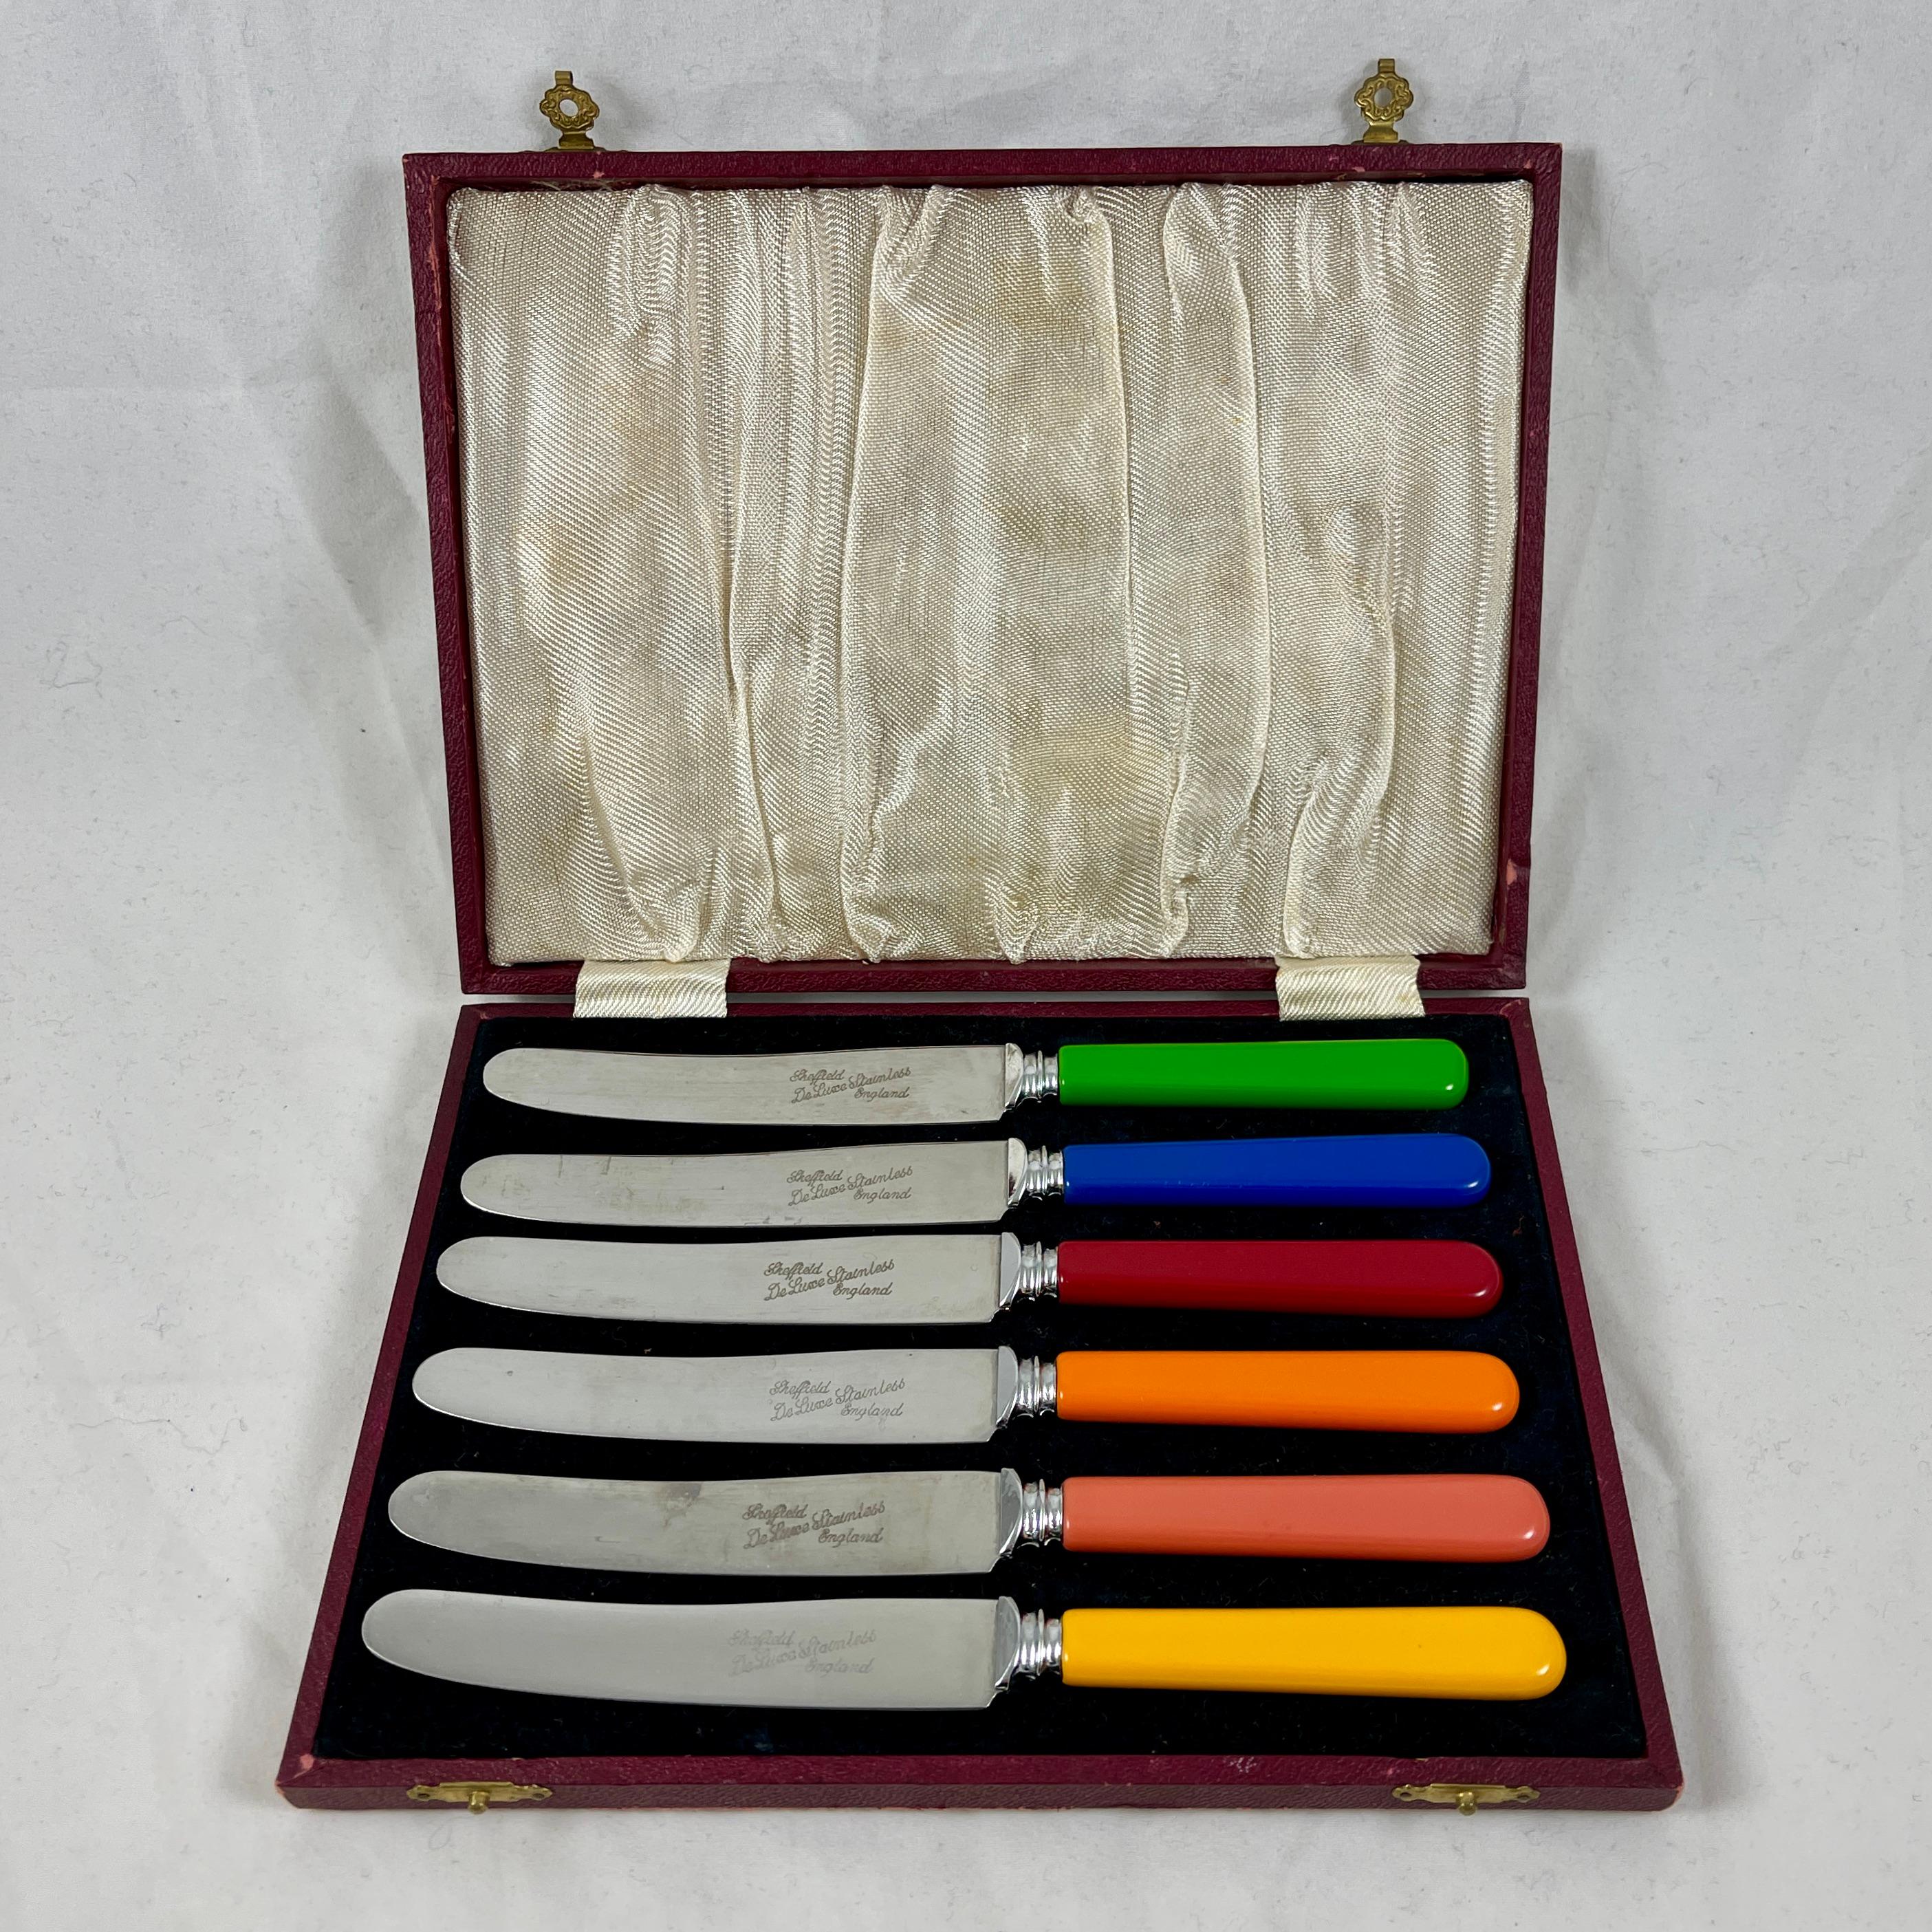 English Sheffield DeLuxe Bakelite Rainbow Colored and Stainless Spreaders S/6 2